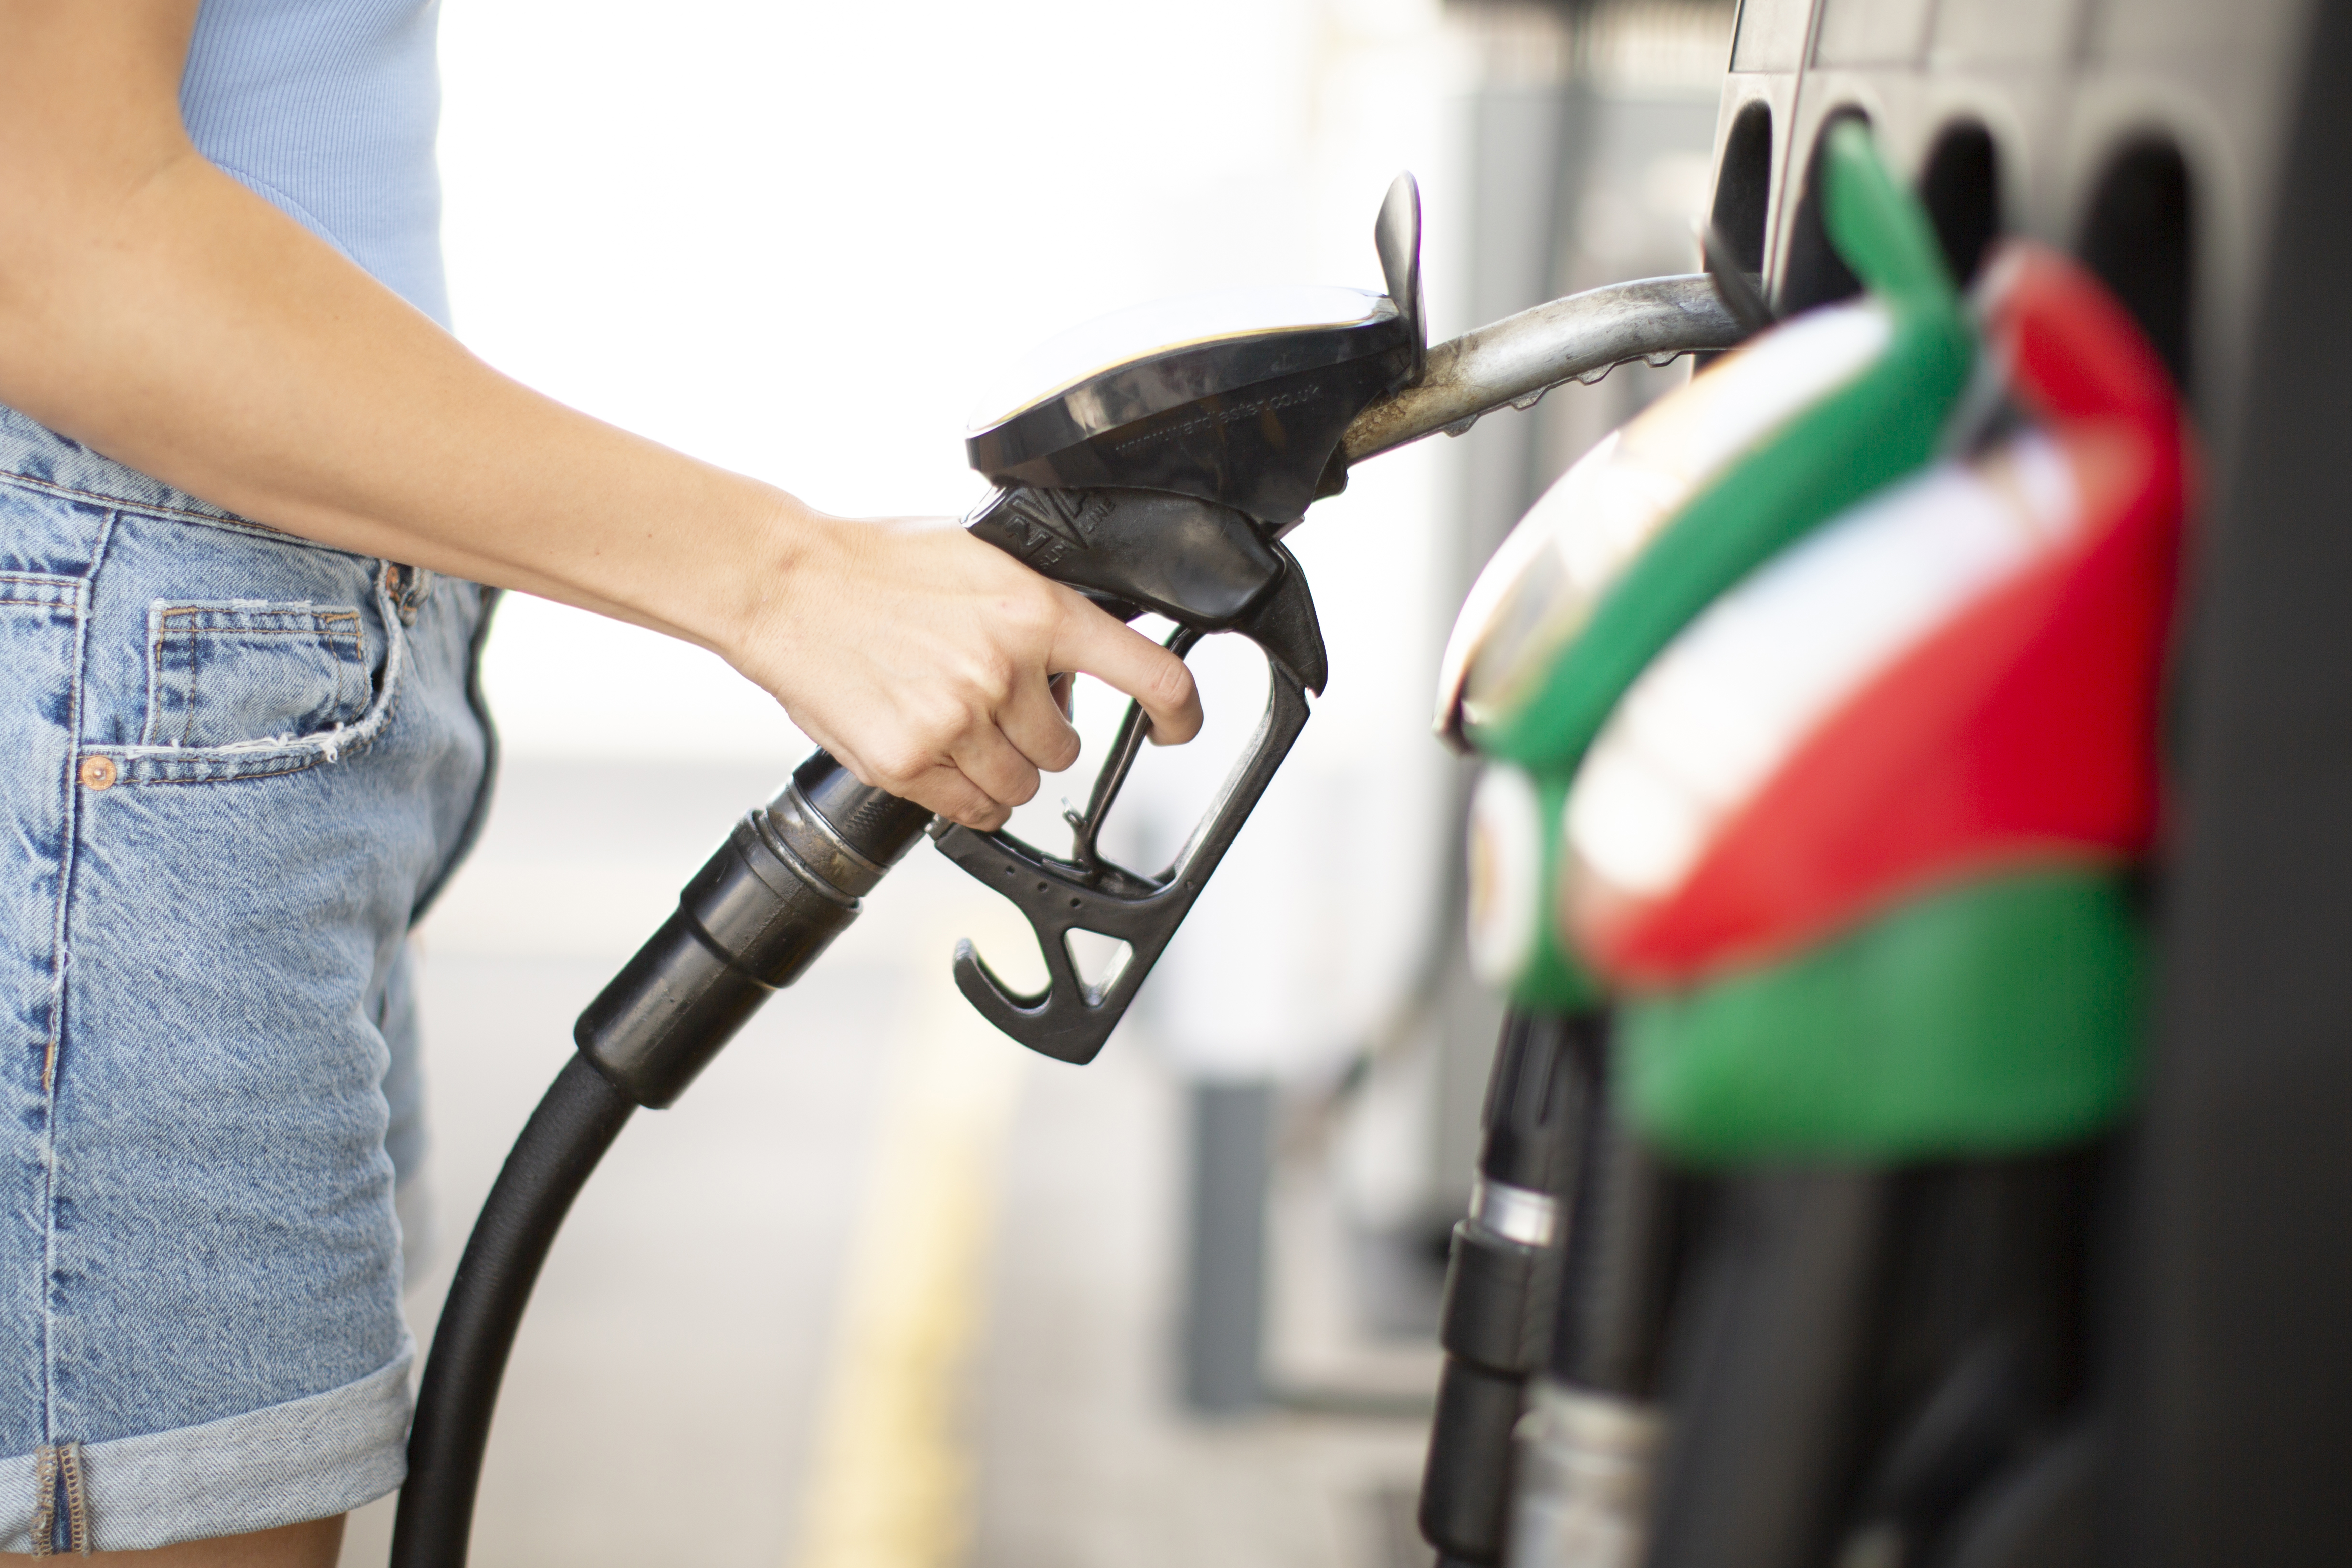 Tax increases are set to hit petrol and diesel drivers